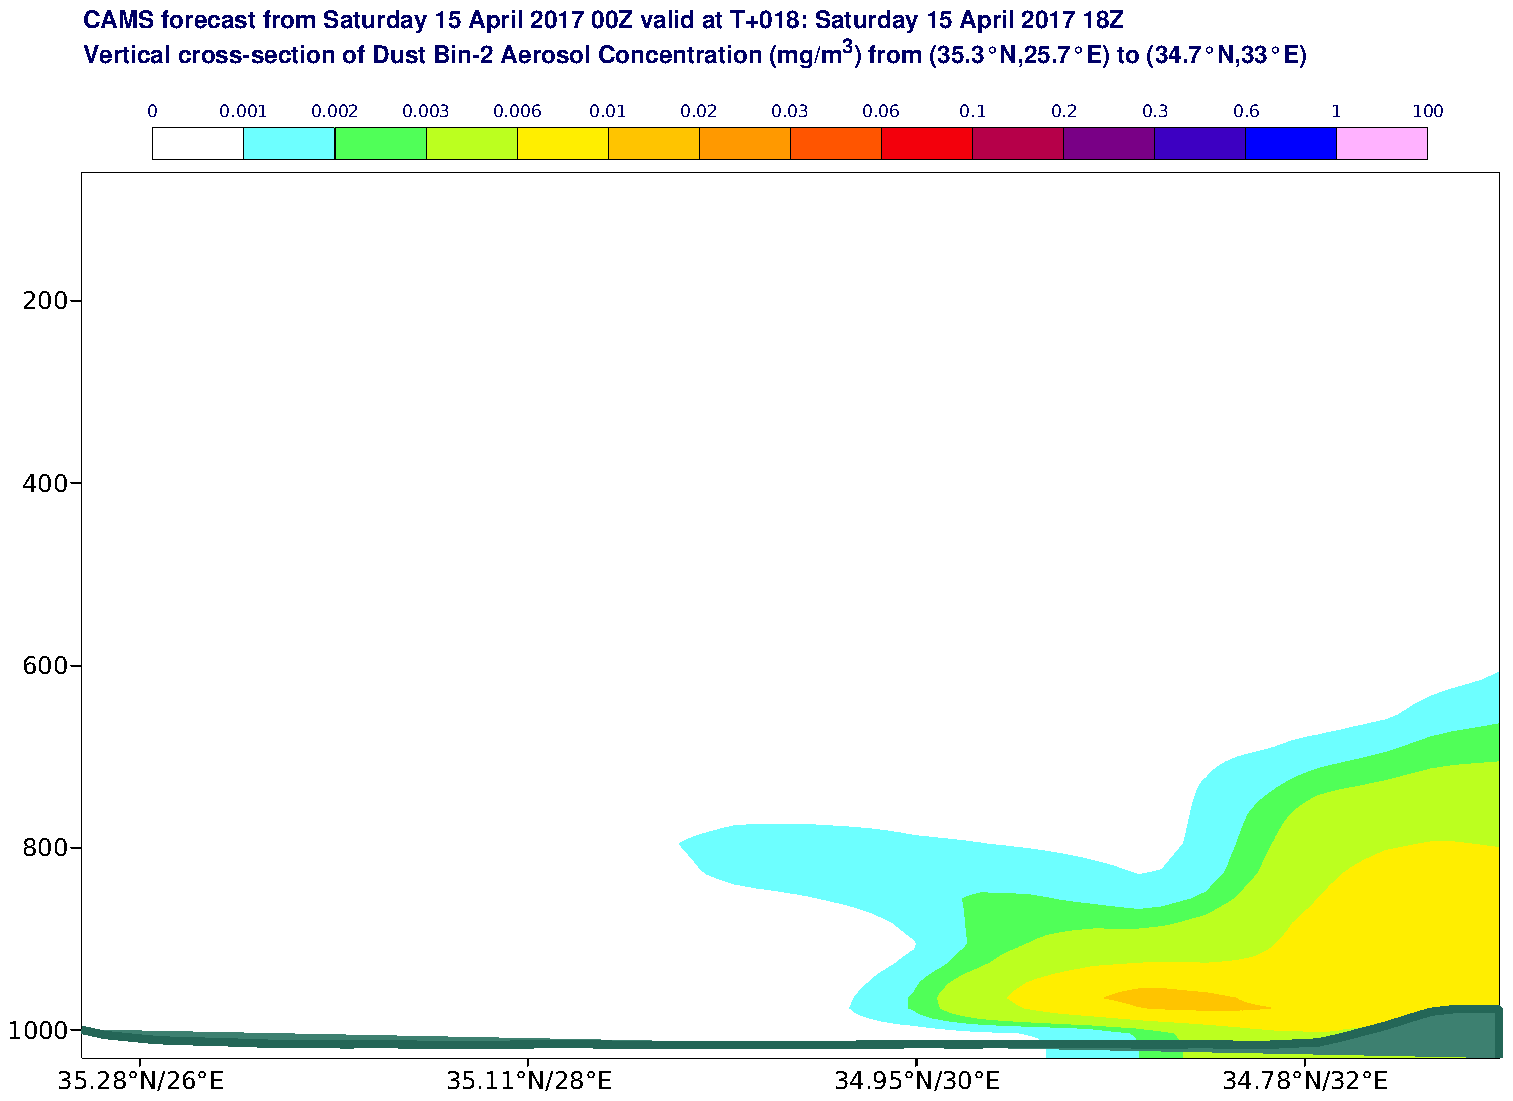 Vertical cross-section of Dust Bin-2 Aerosol Concentration (mg/m3) valid at T18 - 2017-04-15 18:00